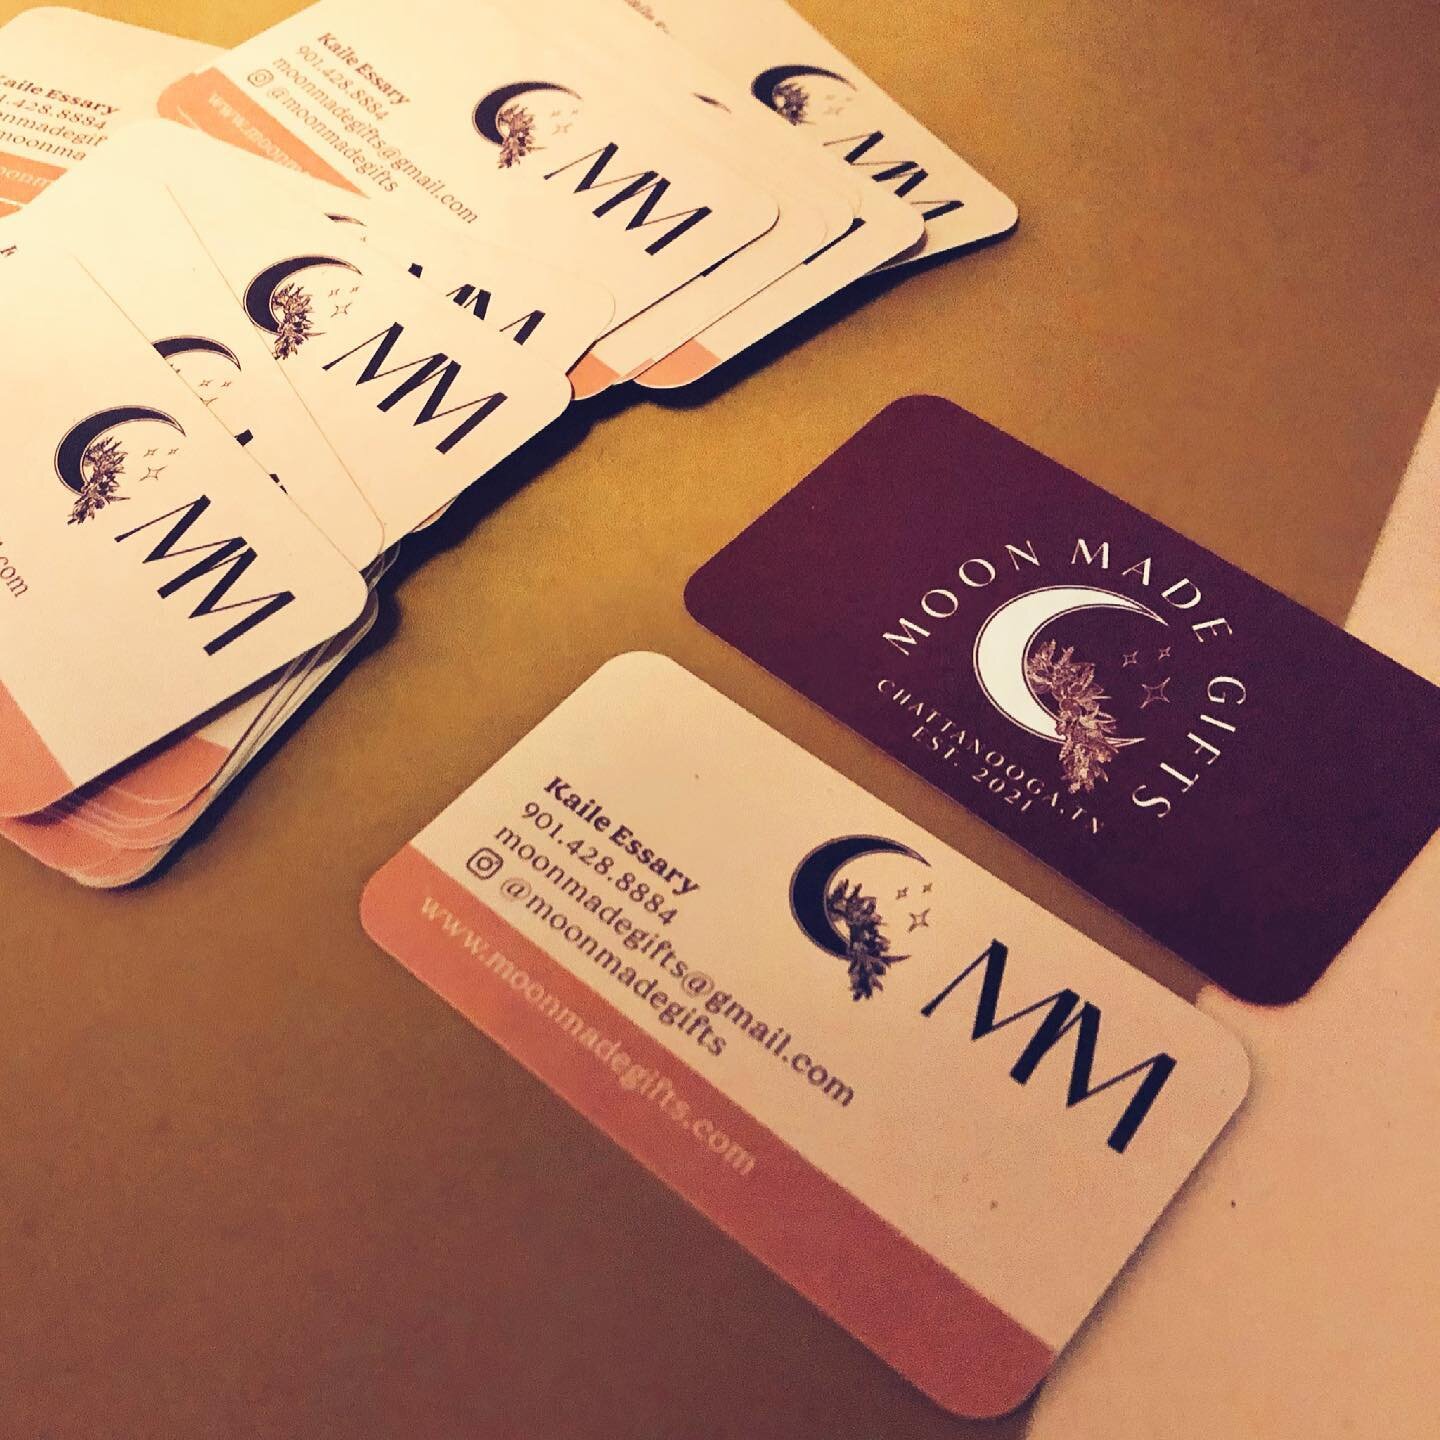 Hello again, print fans! Today is a fun one, we got a request for some business cards as a surprise gift for @moonmadegifts. The request included all of their branding but no design for the card. We were able to work on the design in secret and print